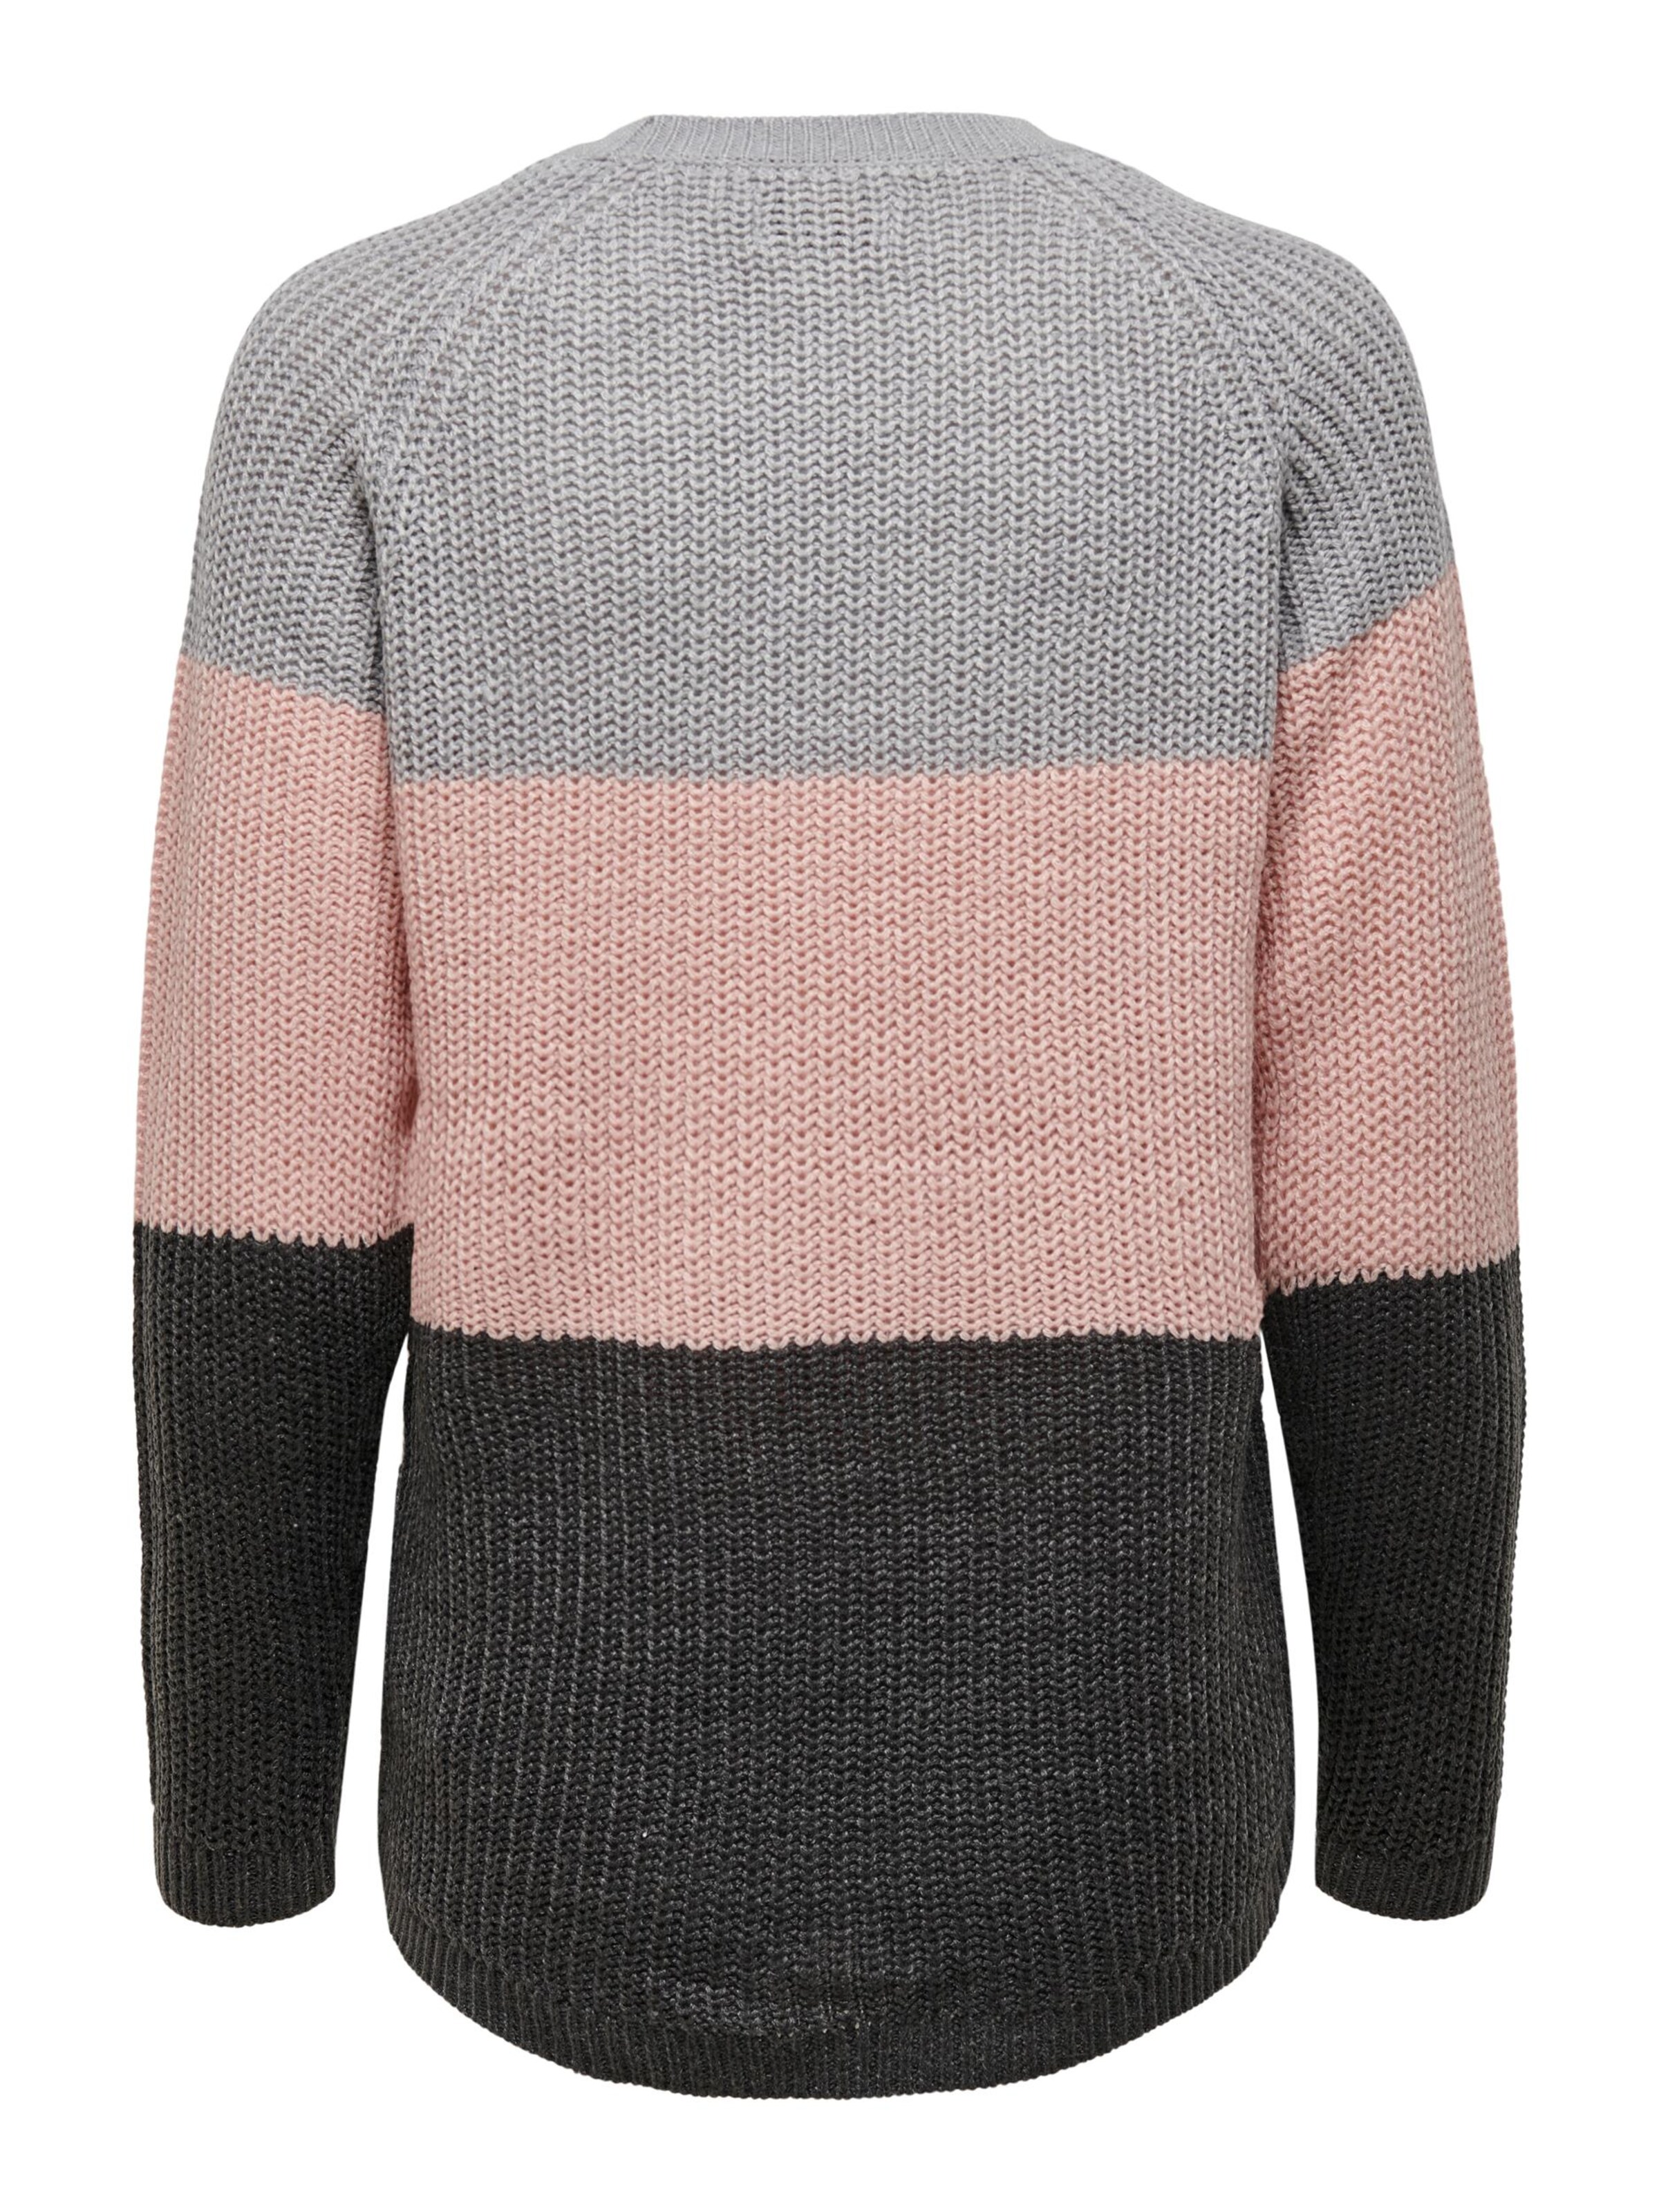 Pulls et mailles Pull-over MANTANNA ONLY en Gris Clair, Anthracite 